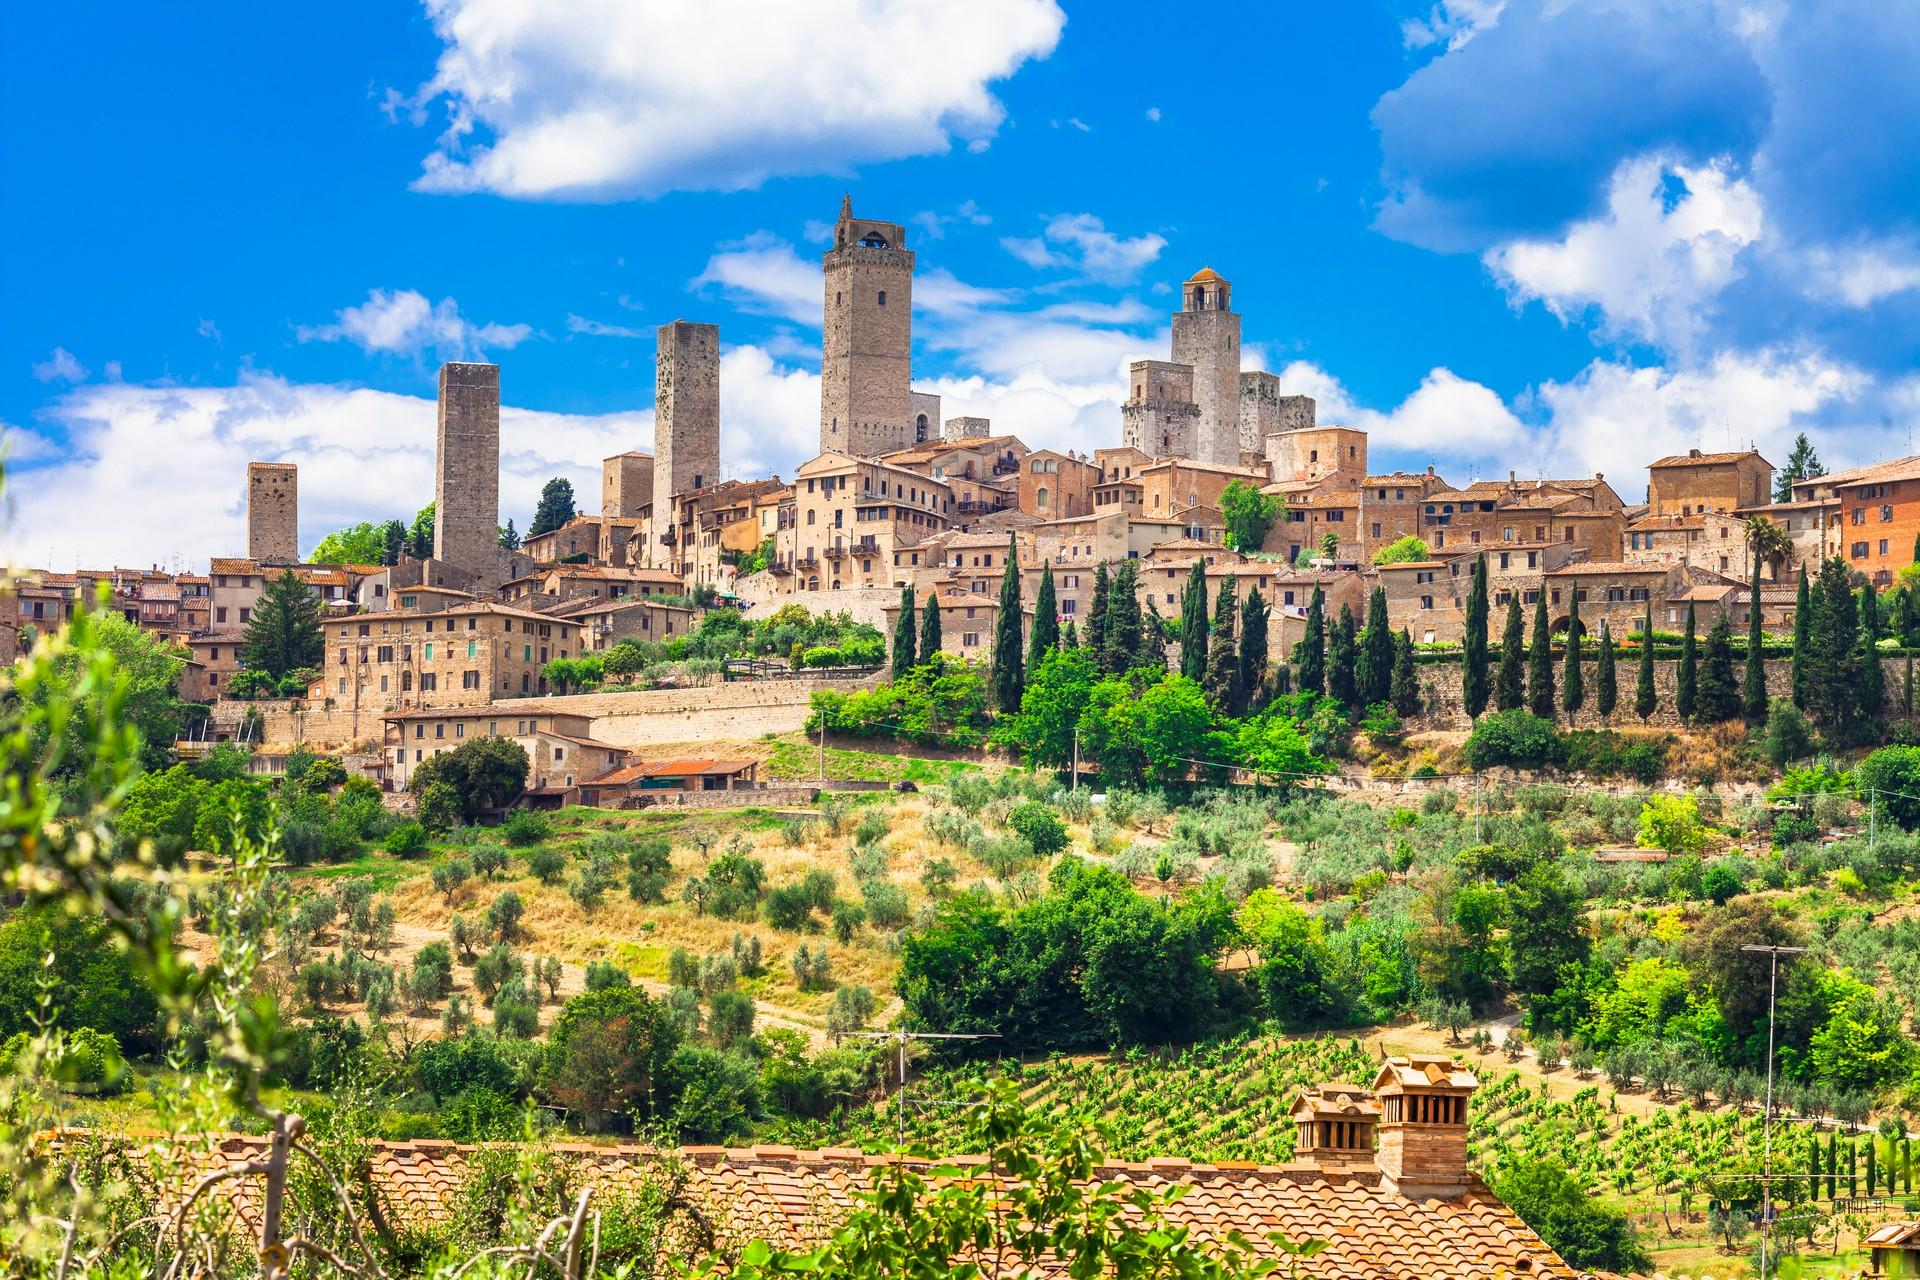 Architecture in San Gimignano in sunny weather with few clouds